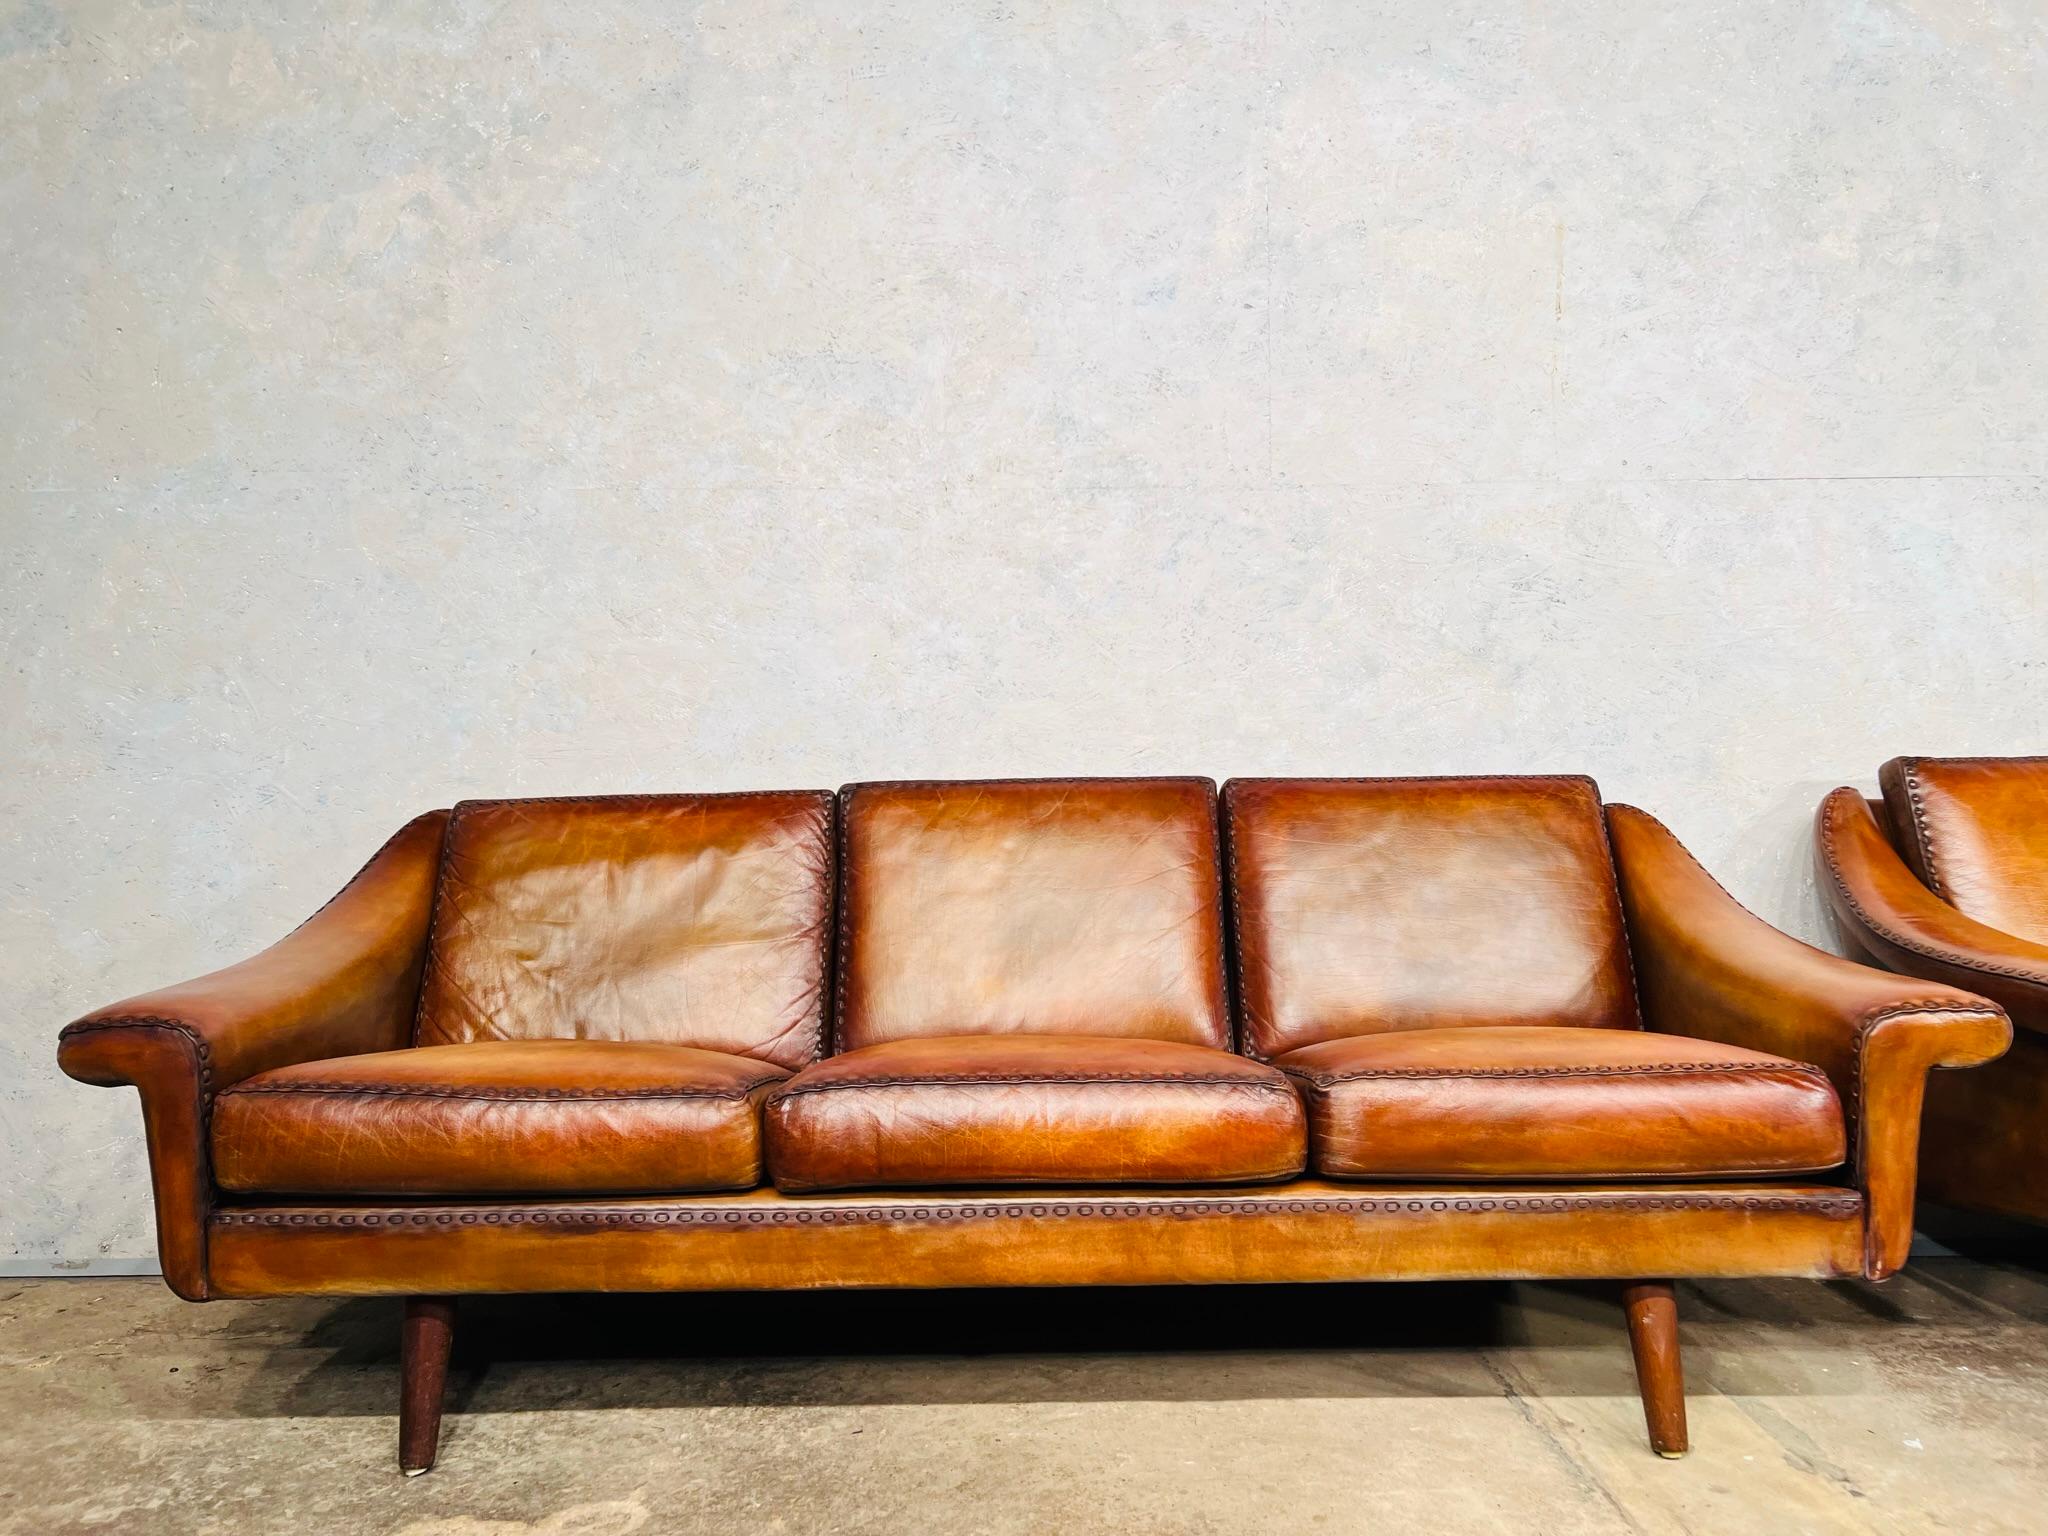 Pair Of Matador Leather 3 Seater Sofa by Aage Christiansen for Eran 1960s #642 For Sale 3